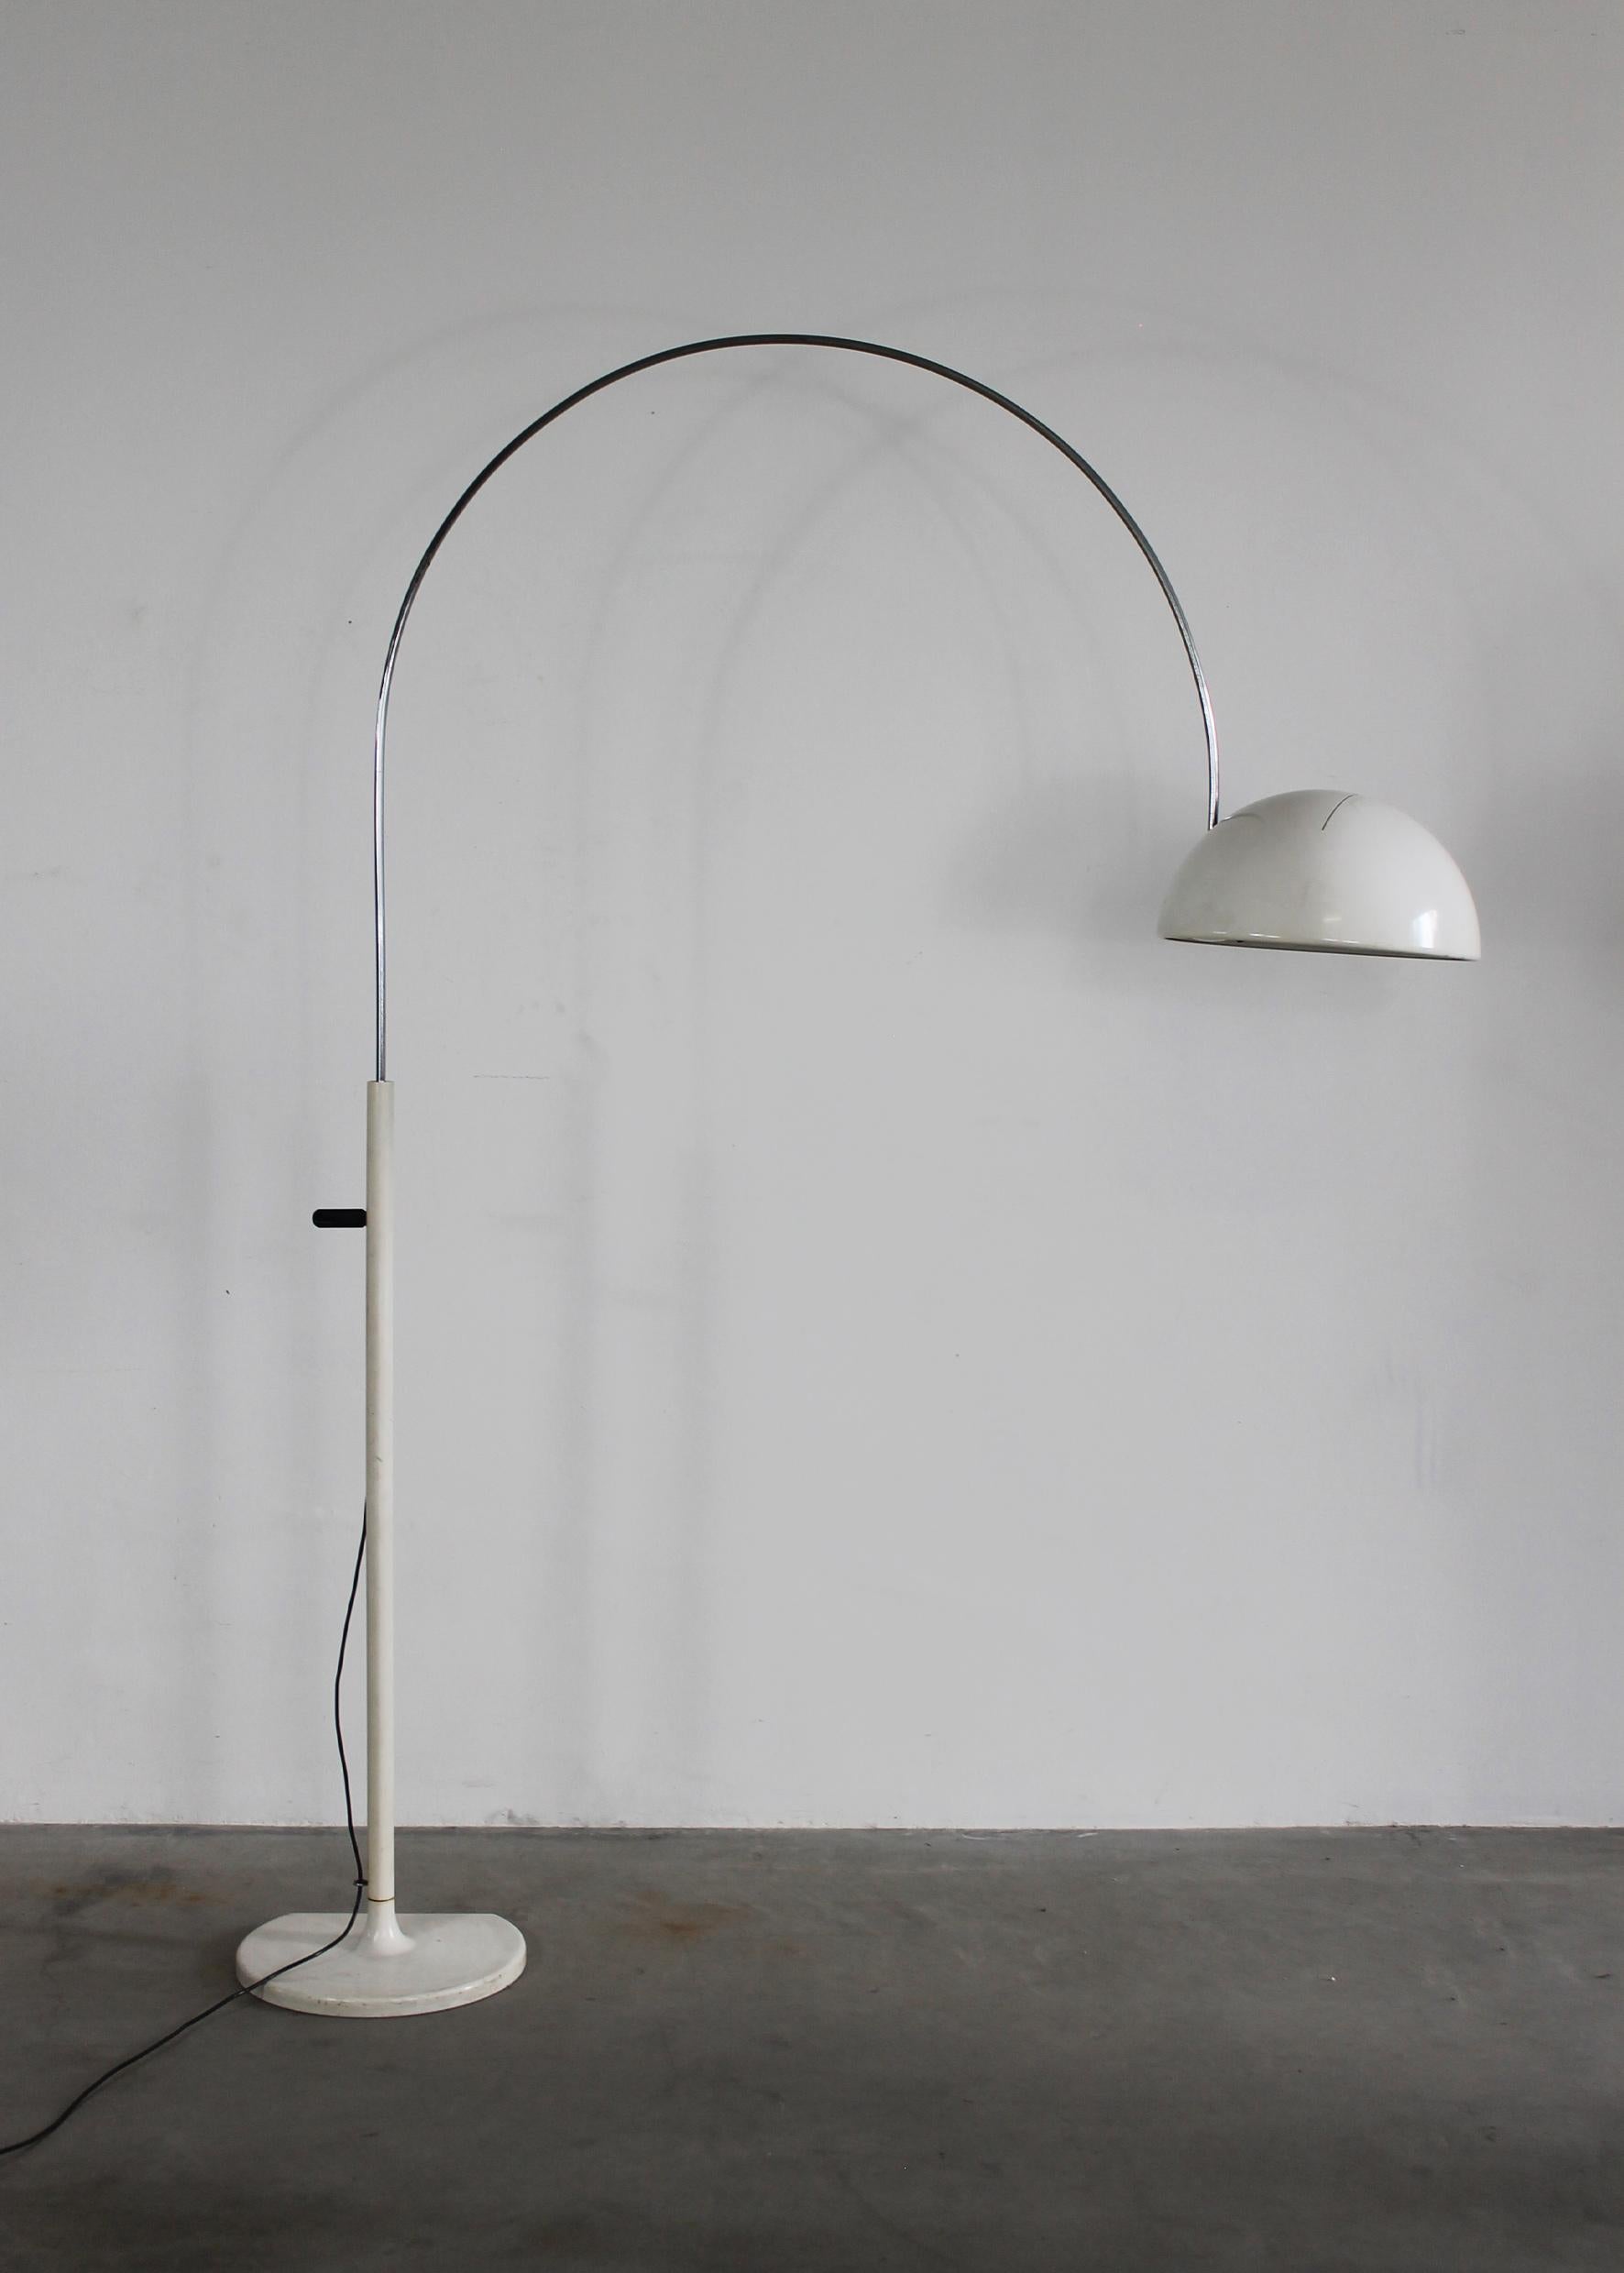 Coupè floor lamp with a structure in white lacquered metal, designed by Joe Colombo and manufactured by Oluce in 1967, circa Italy. 

Measures: Height: 175 cm 
Width: 140 cm 

Lampshade diameter 40 cm

Lamp base 30 x 32 cm 

Joe Colombo